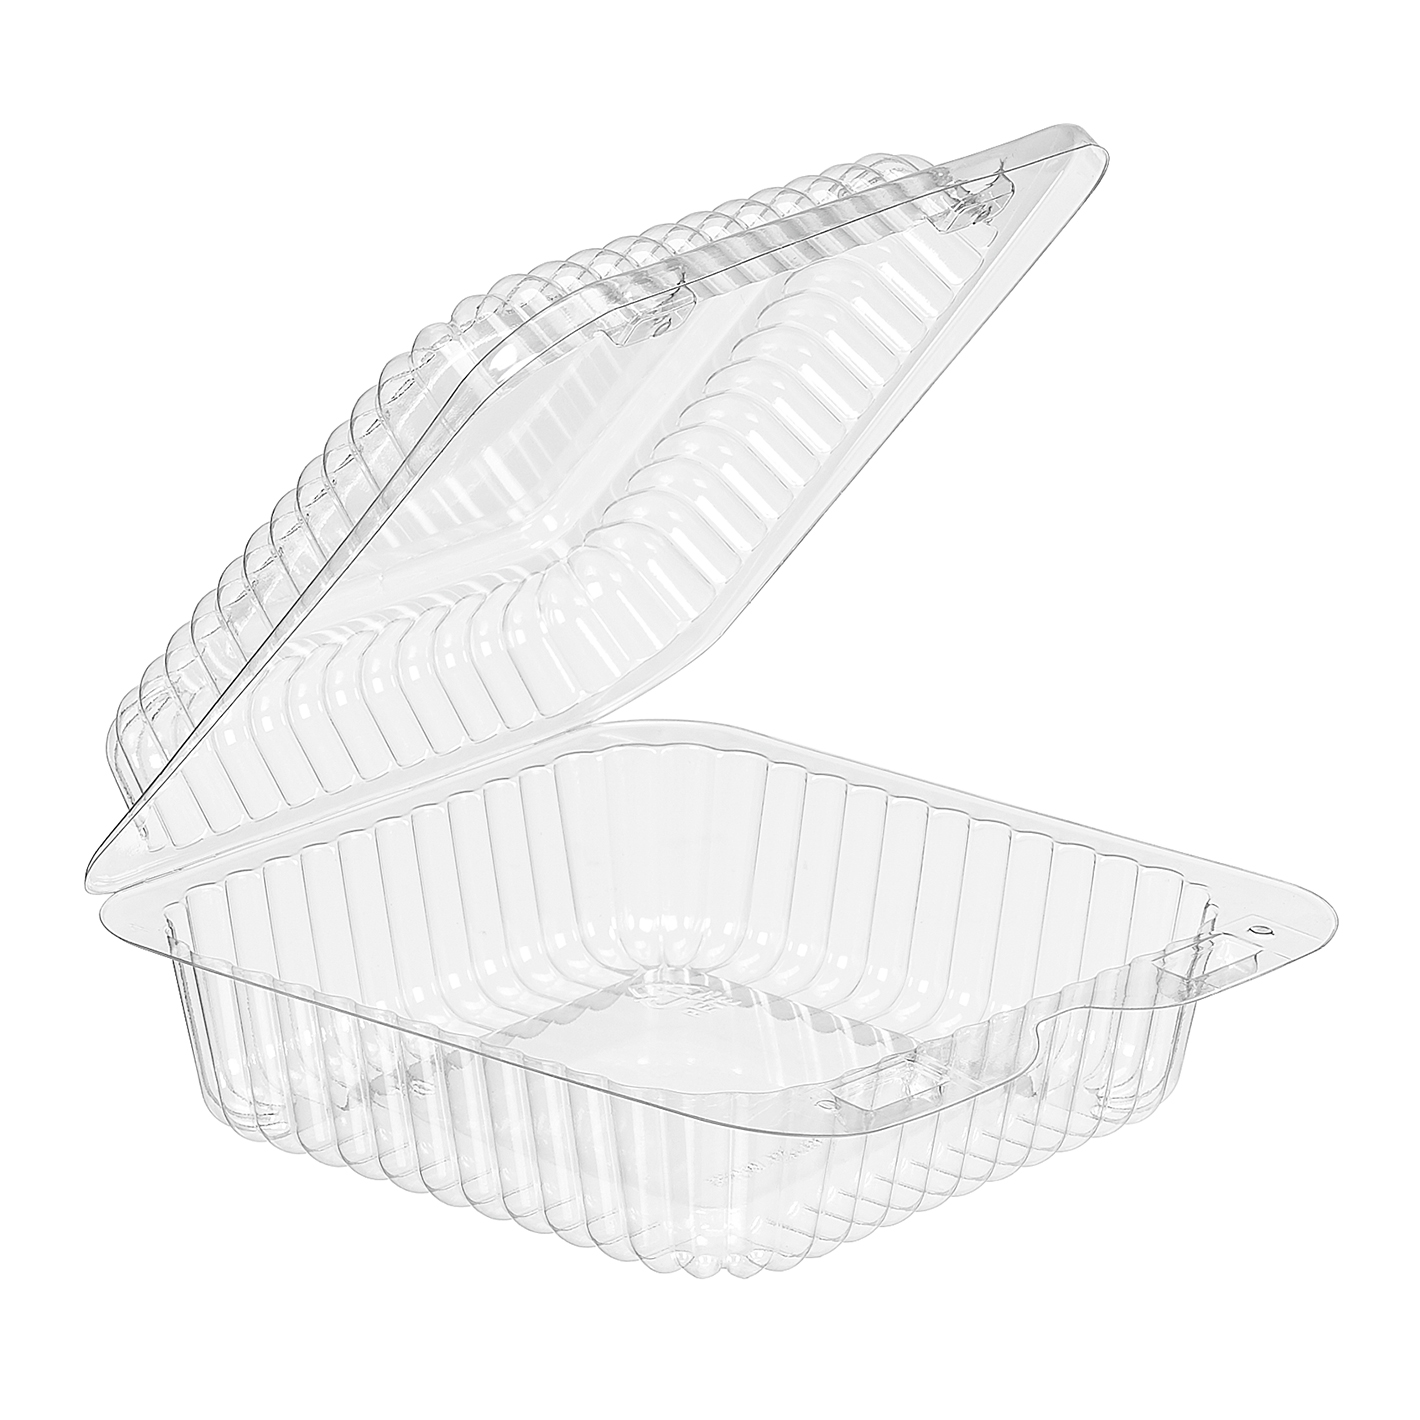 SLP10  5 X 5 X 2 INLINE CLEAR HINGED CONTAINER     500/CS